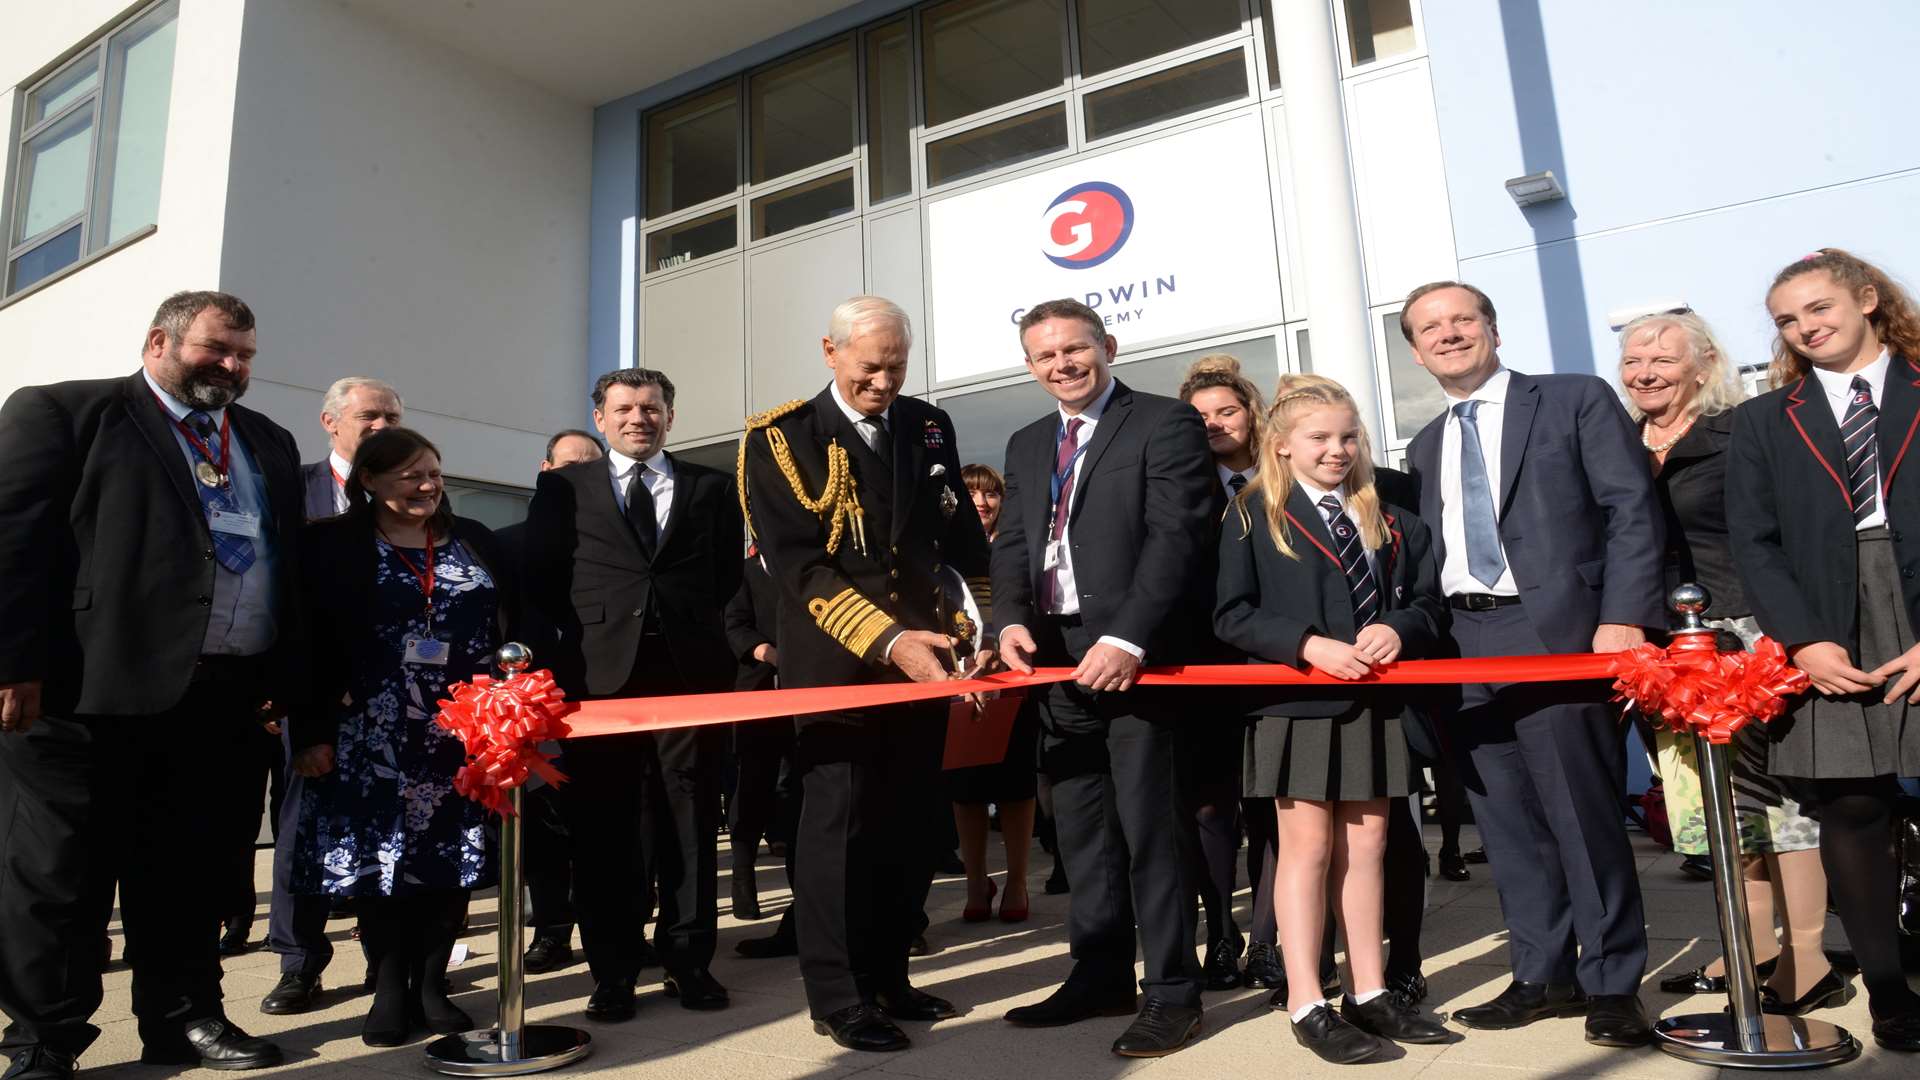 The opening of Goodwin Academy in Deal in October